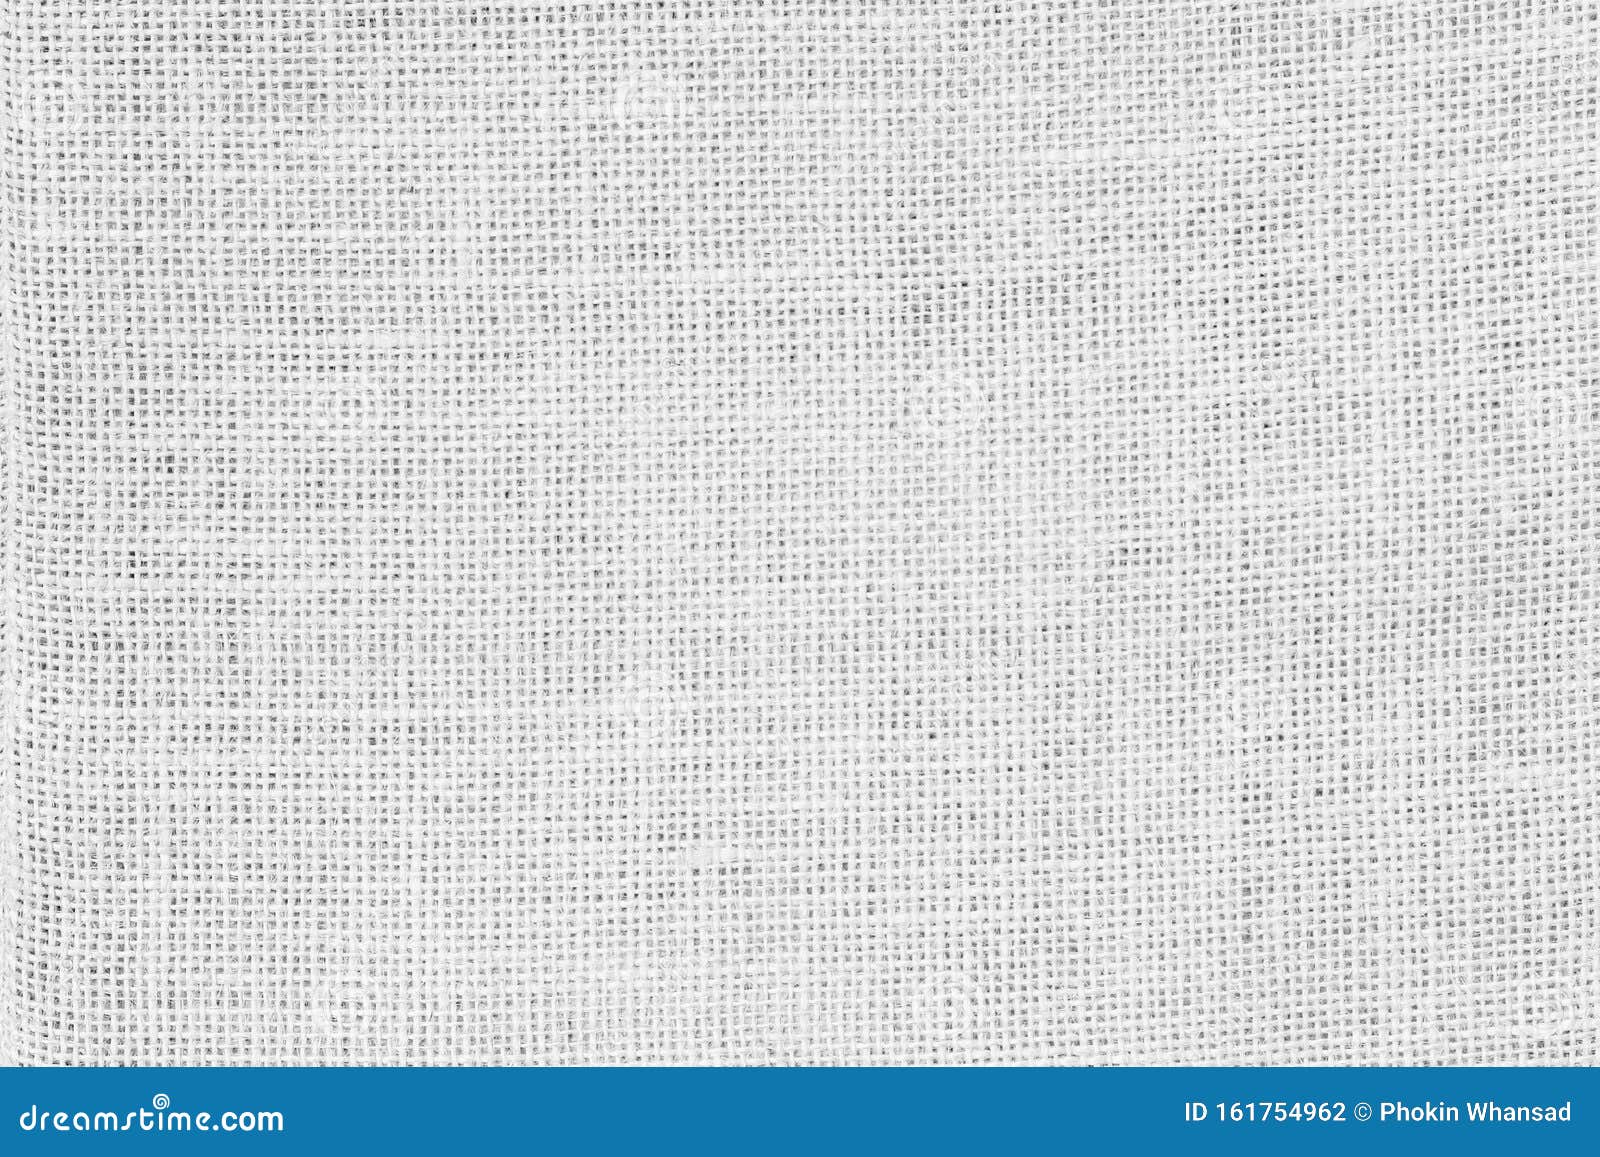 White Hemp Rope Texture Background Haircloth Or Blanket Wale Linen Wallpaper Rustic Sackcloth Canvas Fabric Texture In Natural Stock Photo Image Of Detail Border